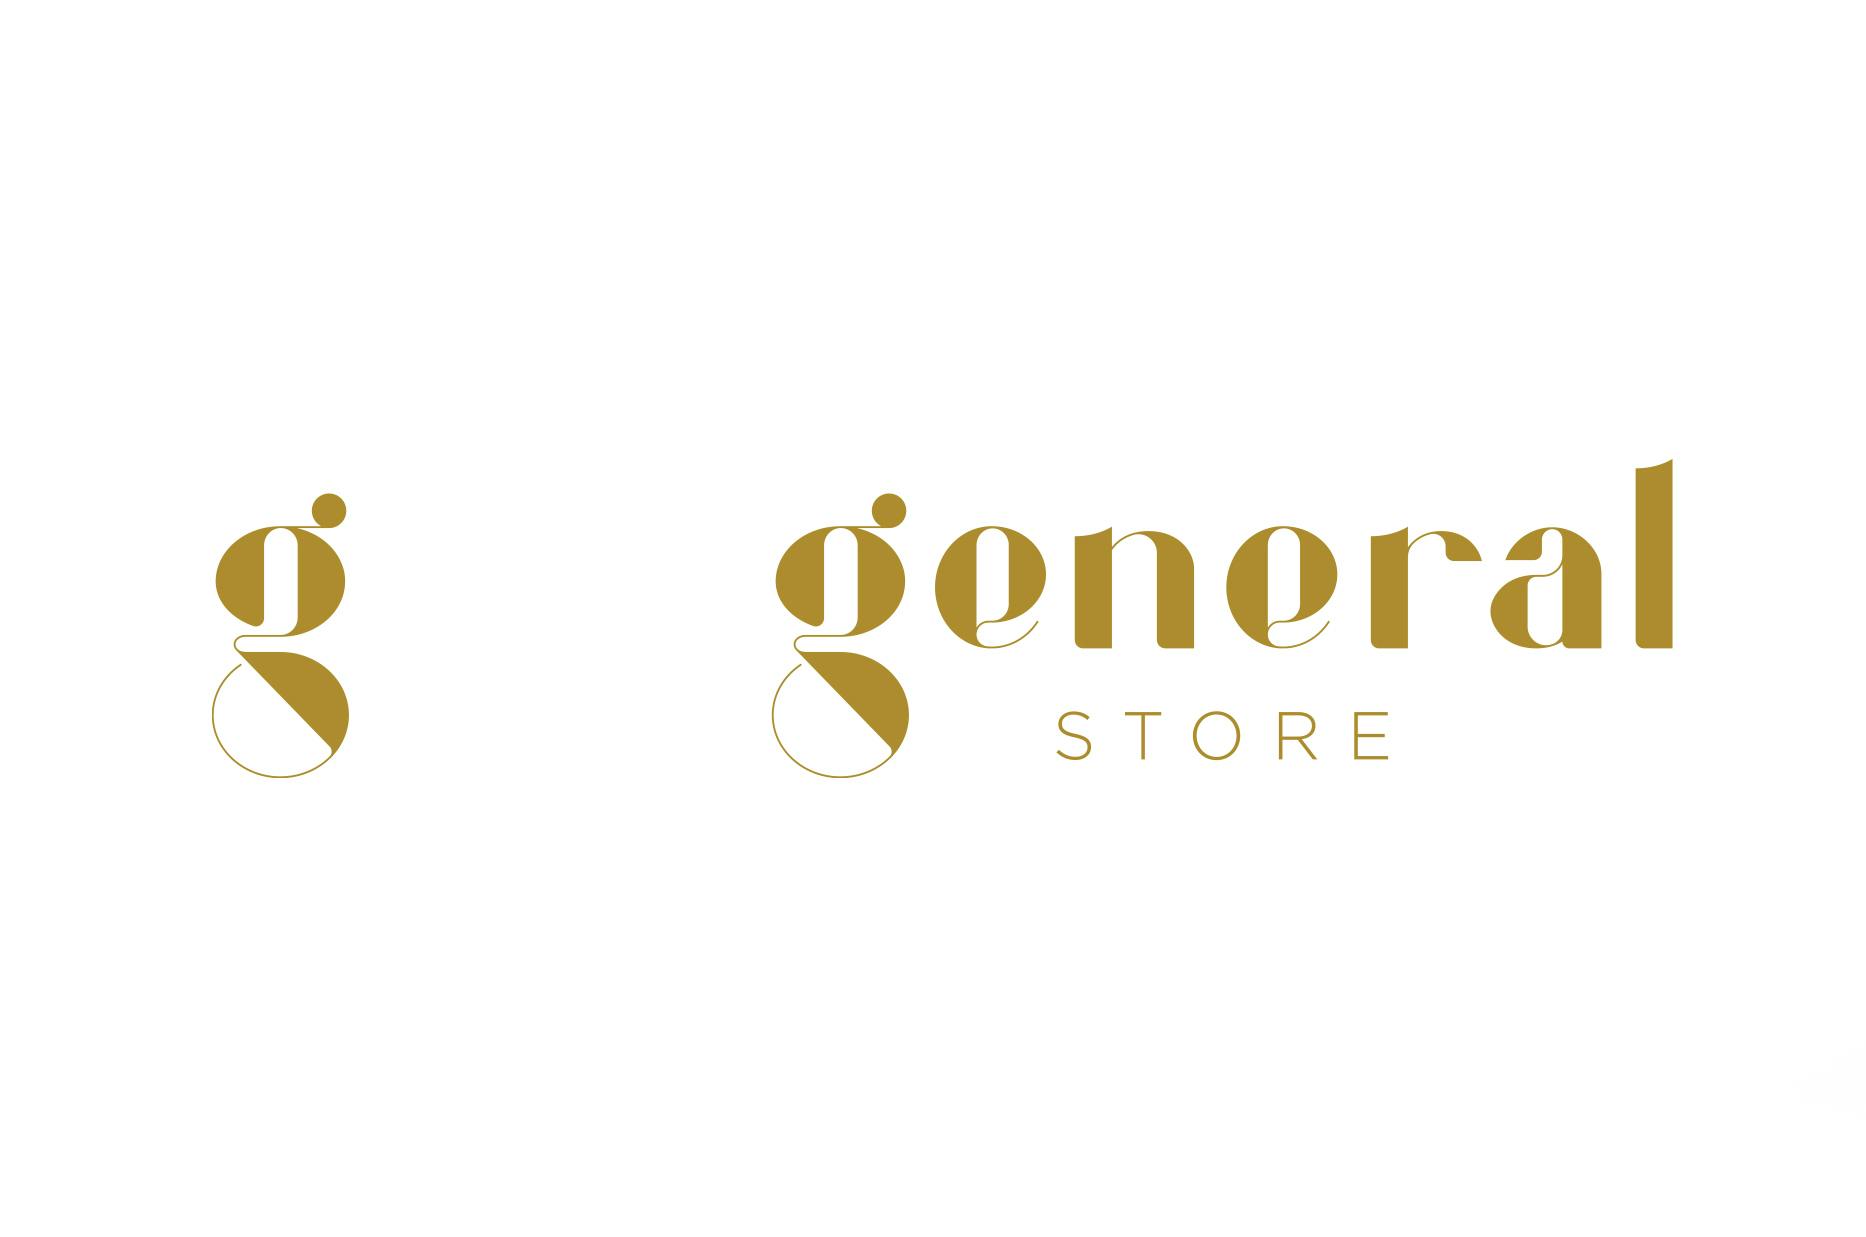 General Store Logo And Icon